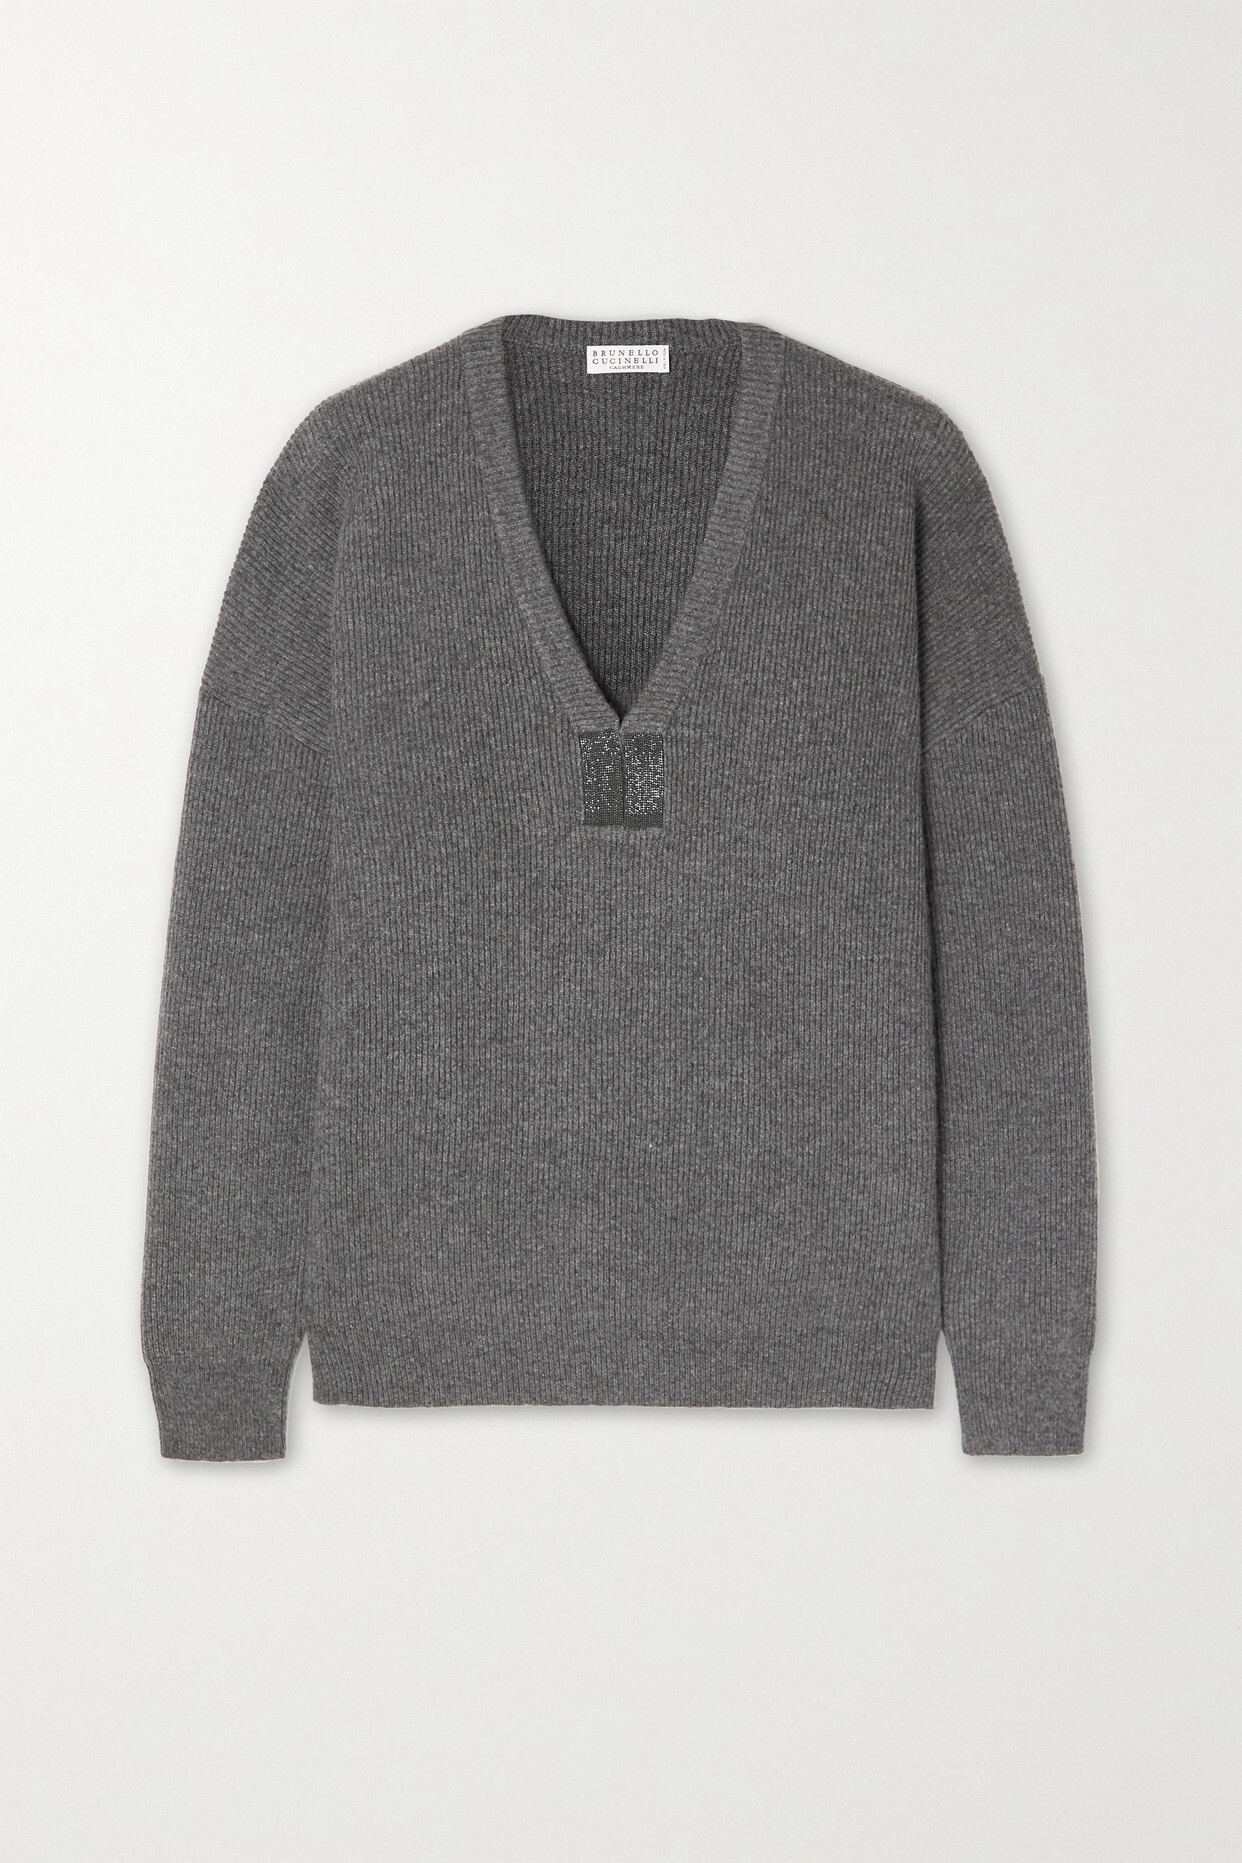 Brunello Cucinelli - Bead-embellished Ribbed Cashmere Sweater - Gray